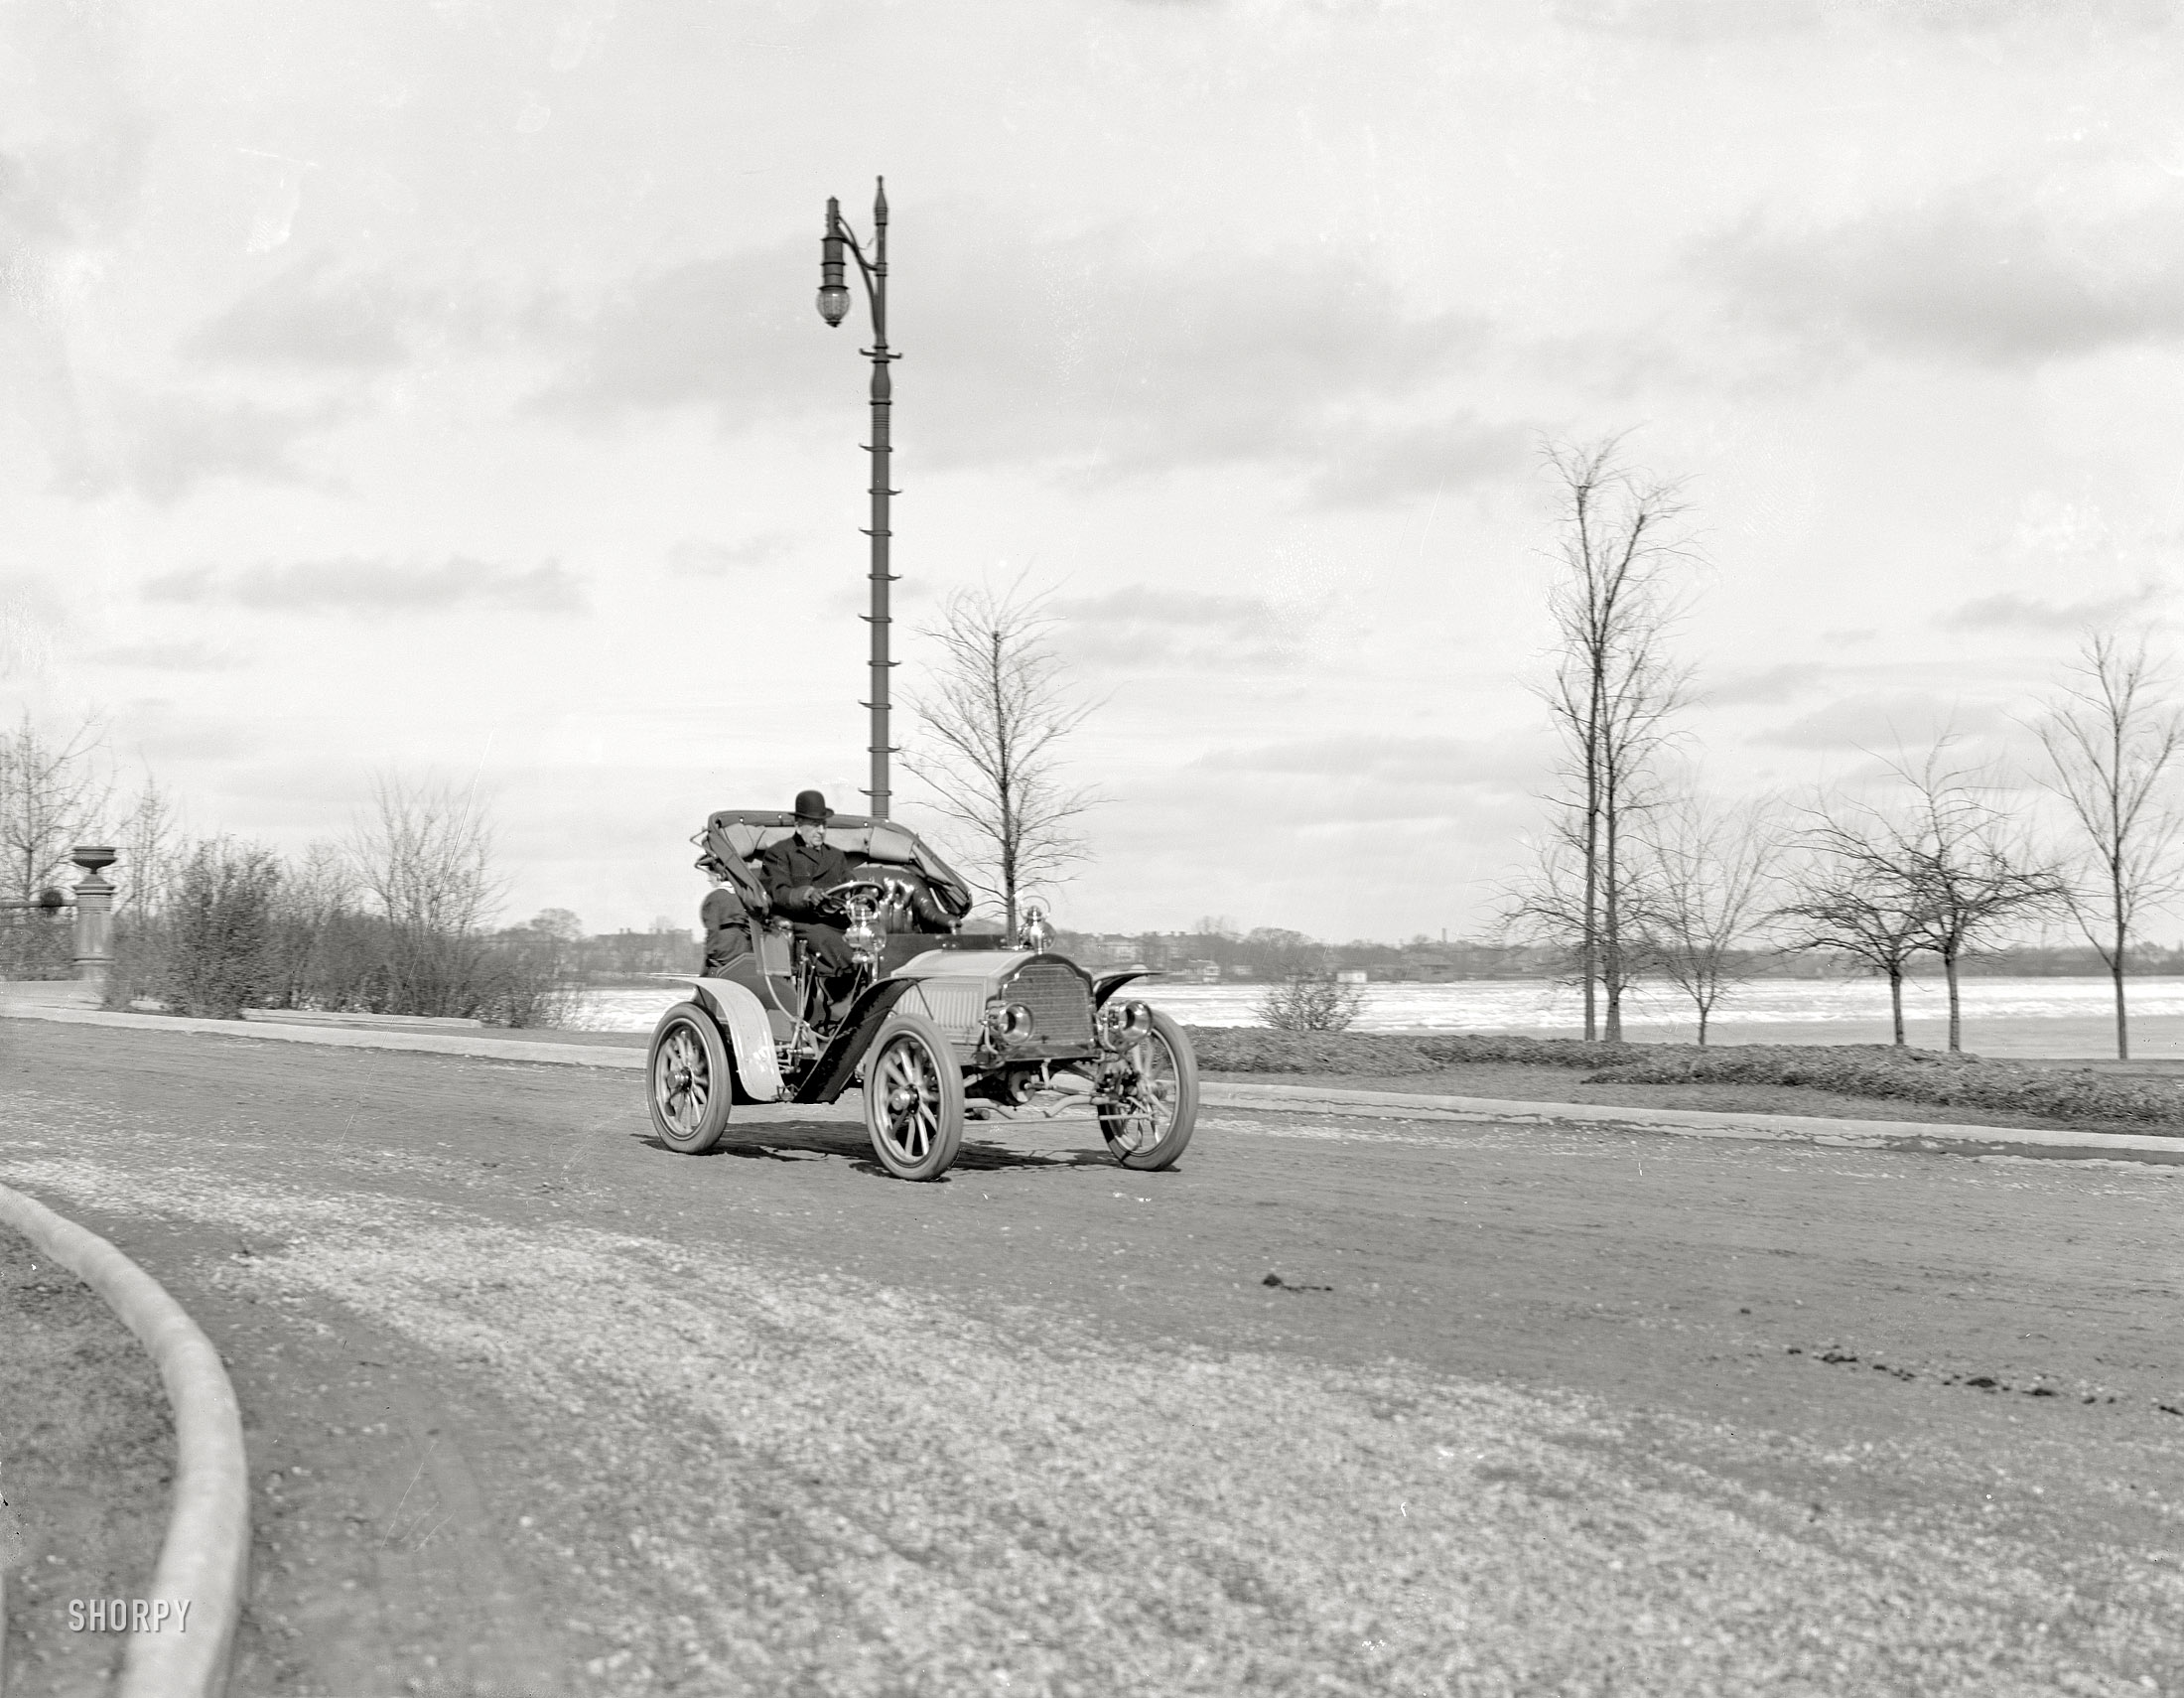 Detroit circa 1908. "Automobile on waterfront road." 8x10 inch dry plate glass negative, Detroit Publishing Company. View full size.